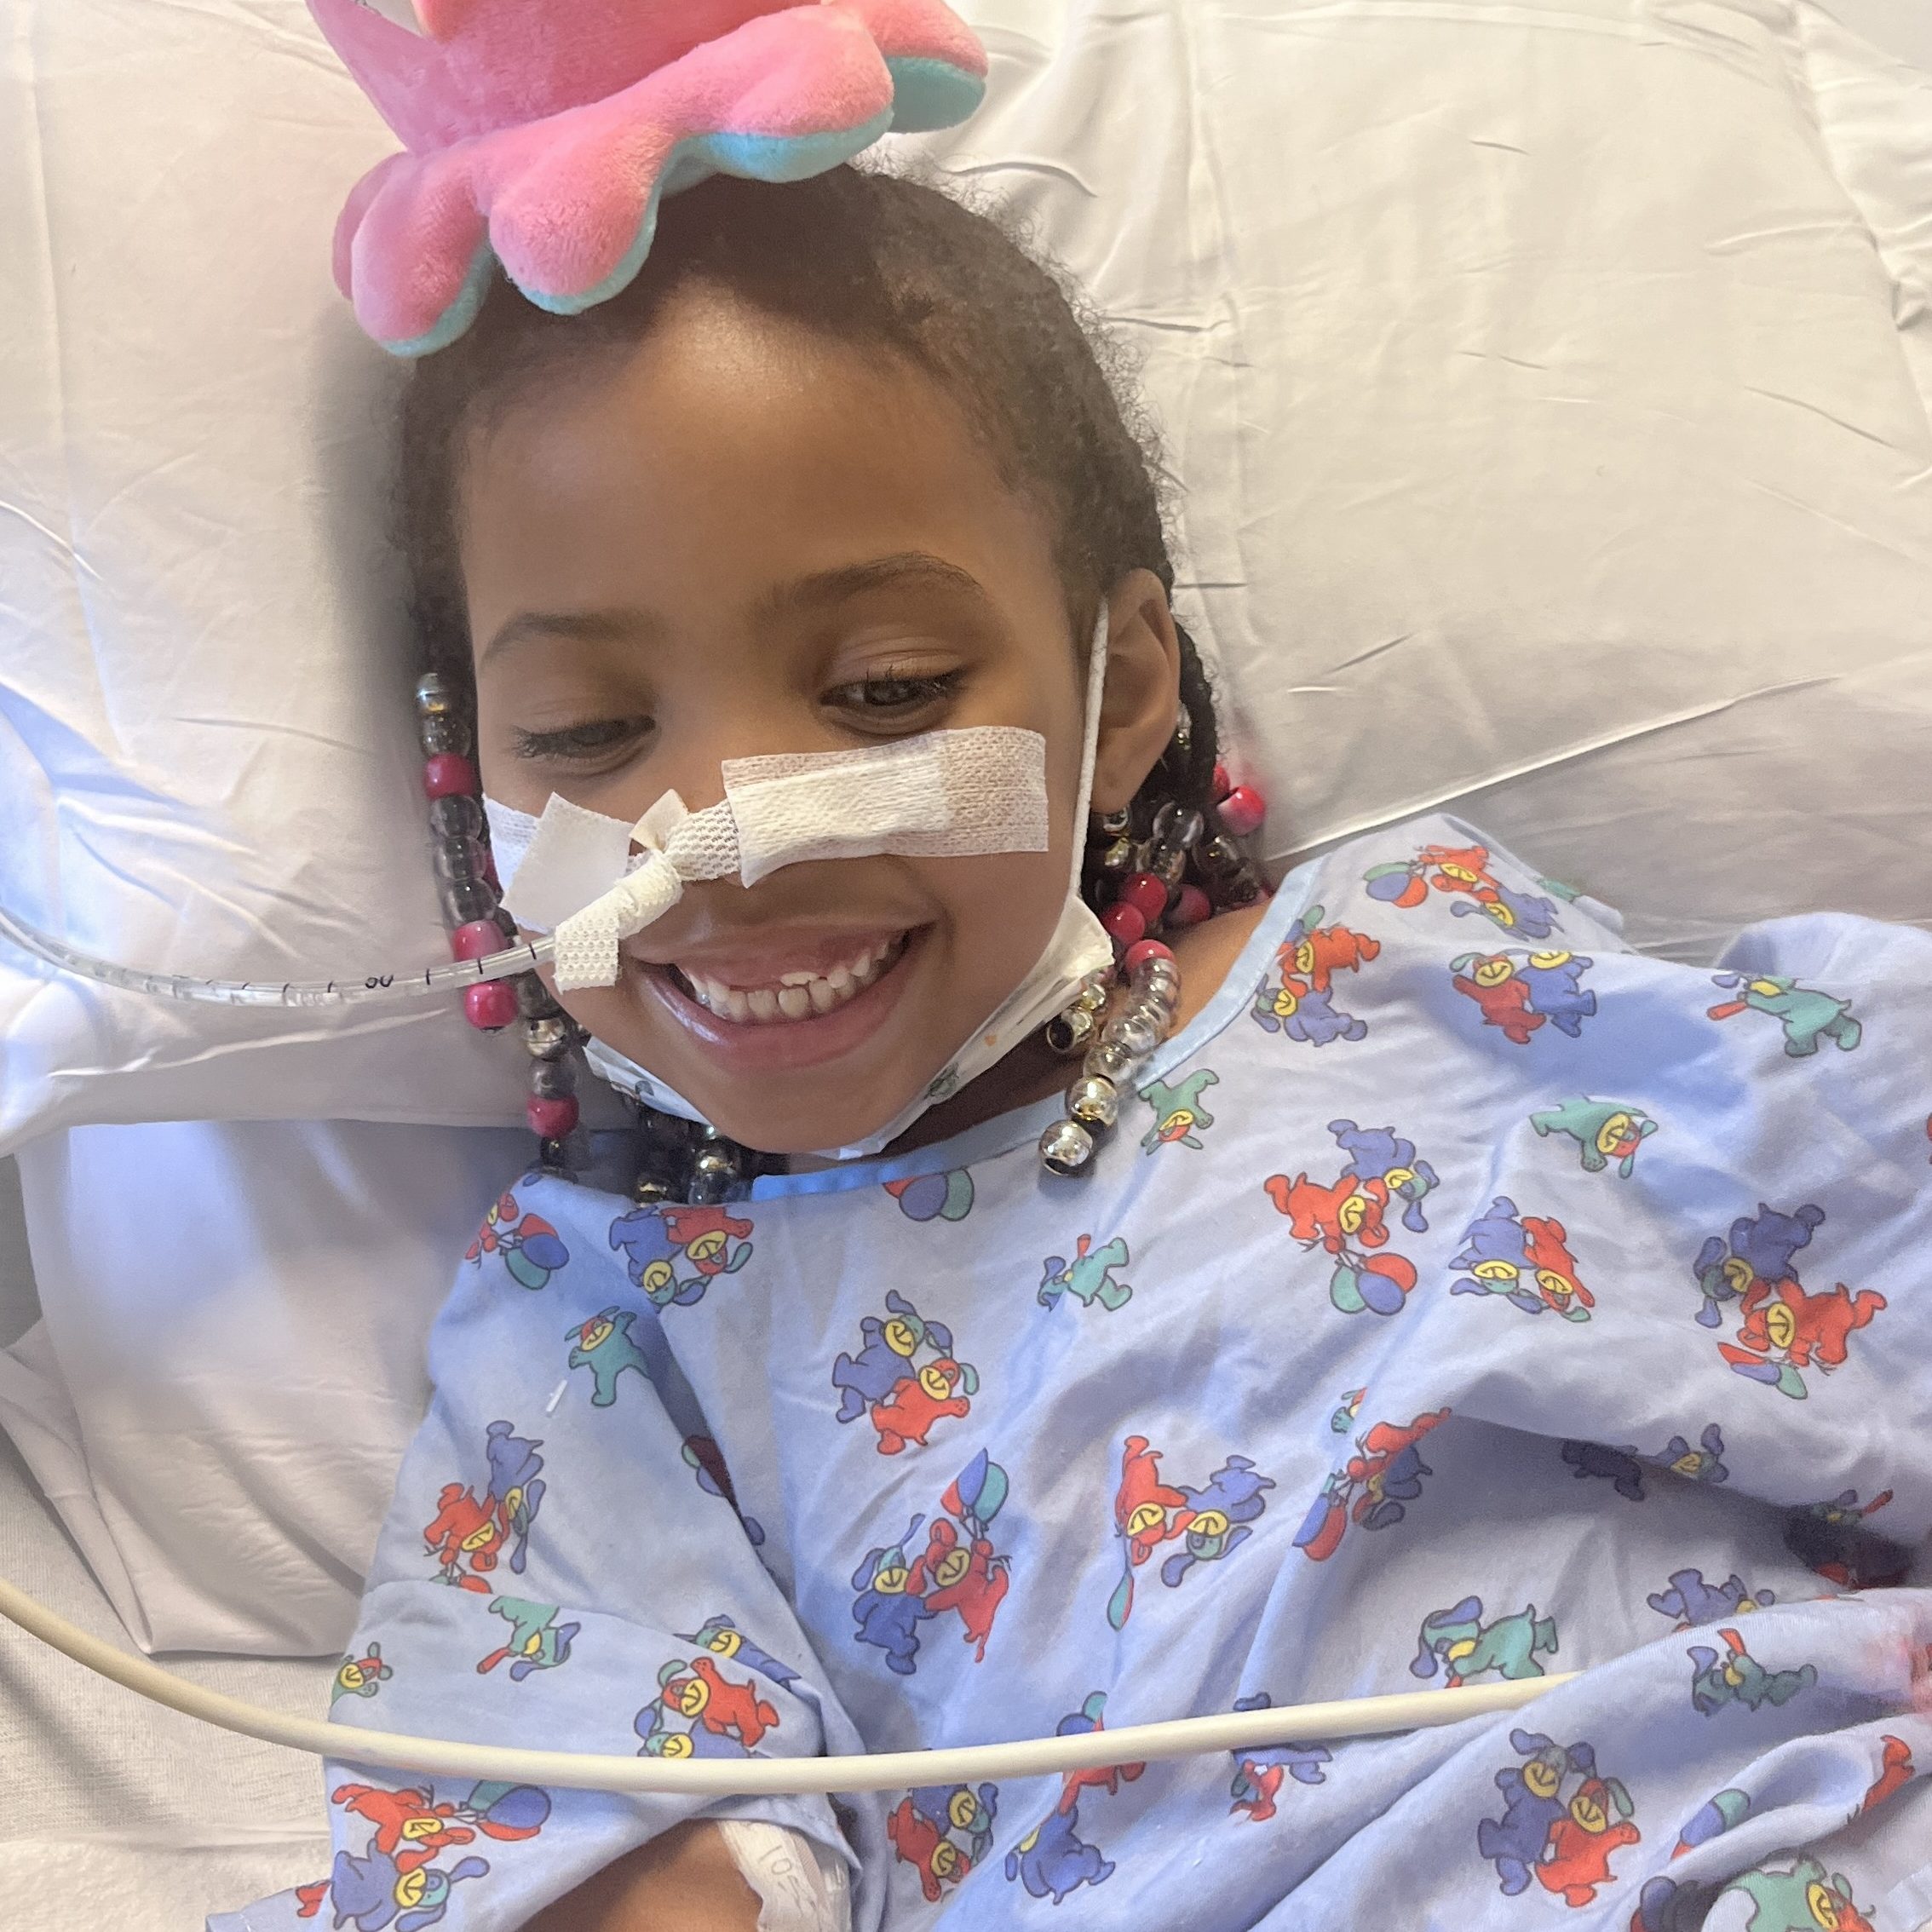 Little girl in hospital bed with NG tube and stuffed animal on her head